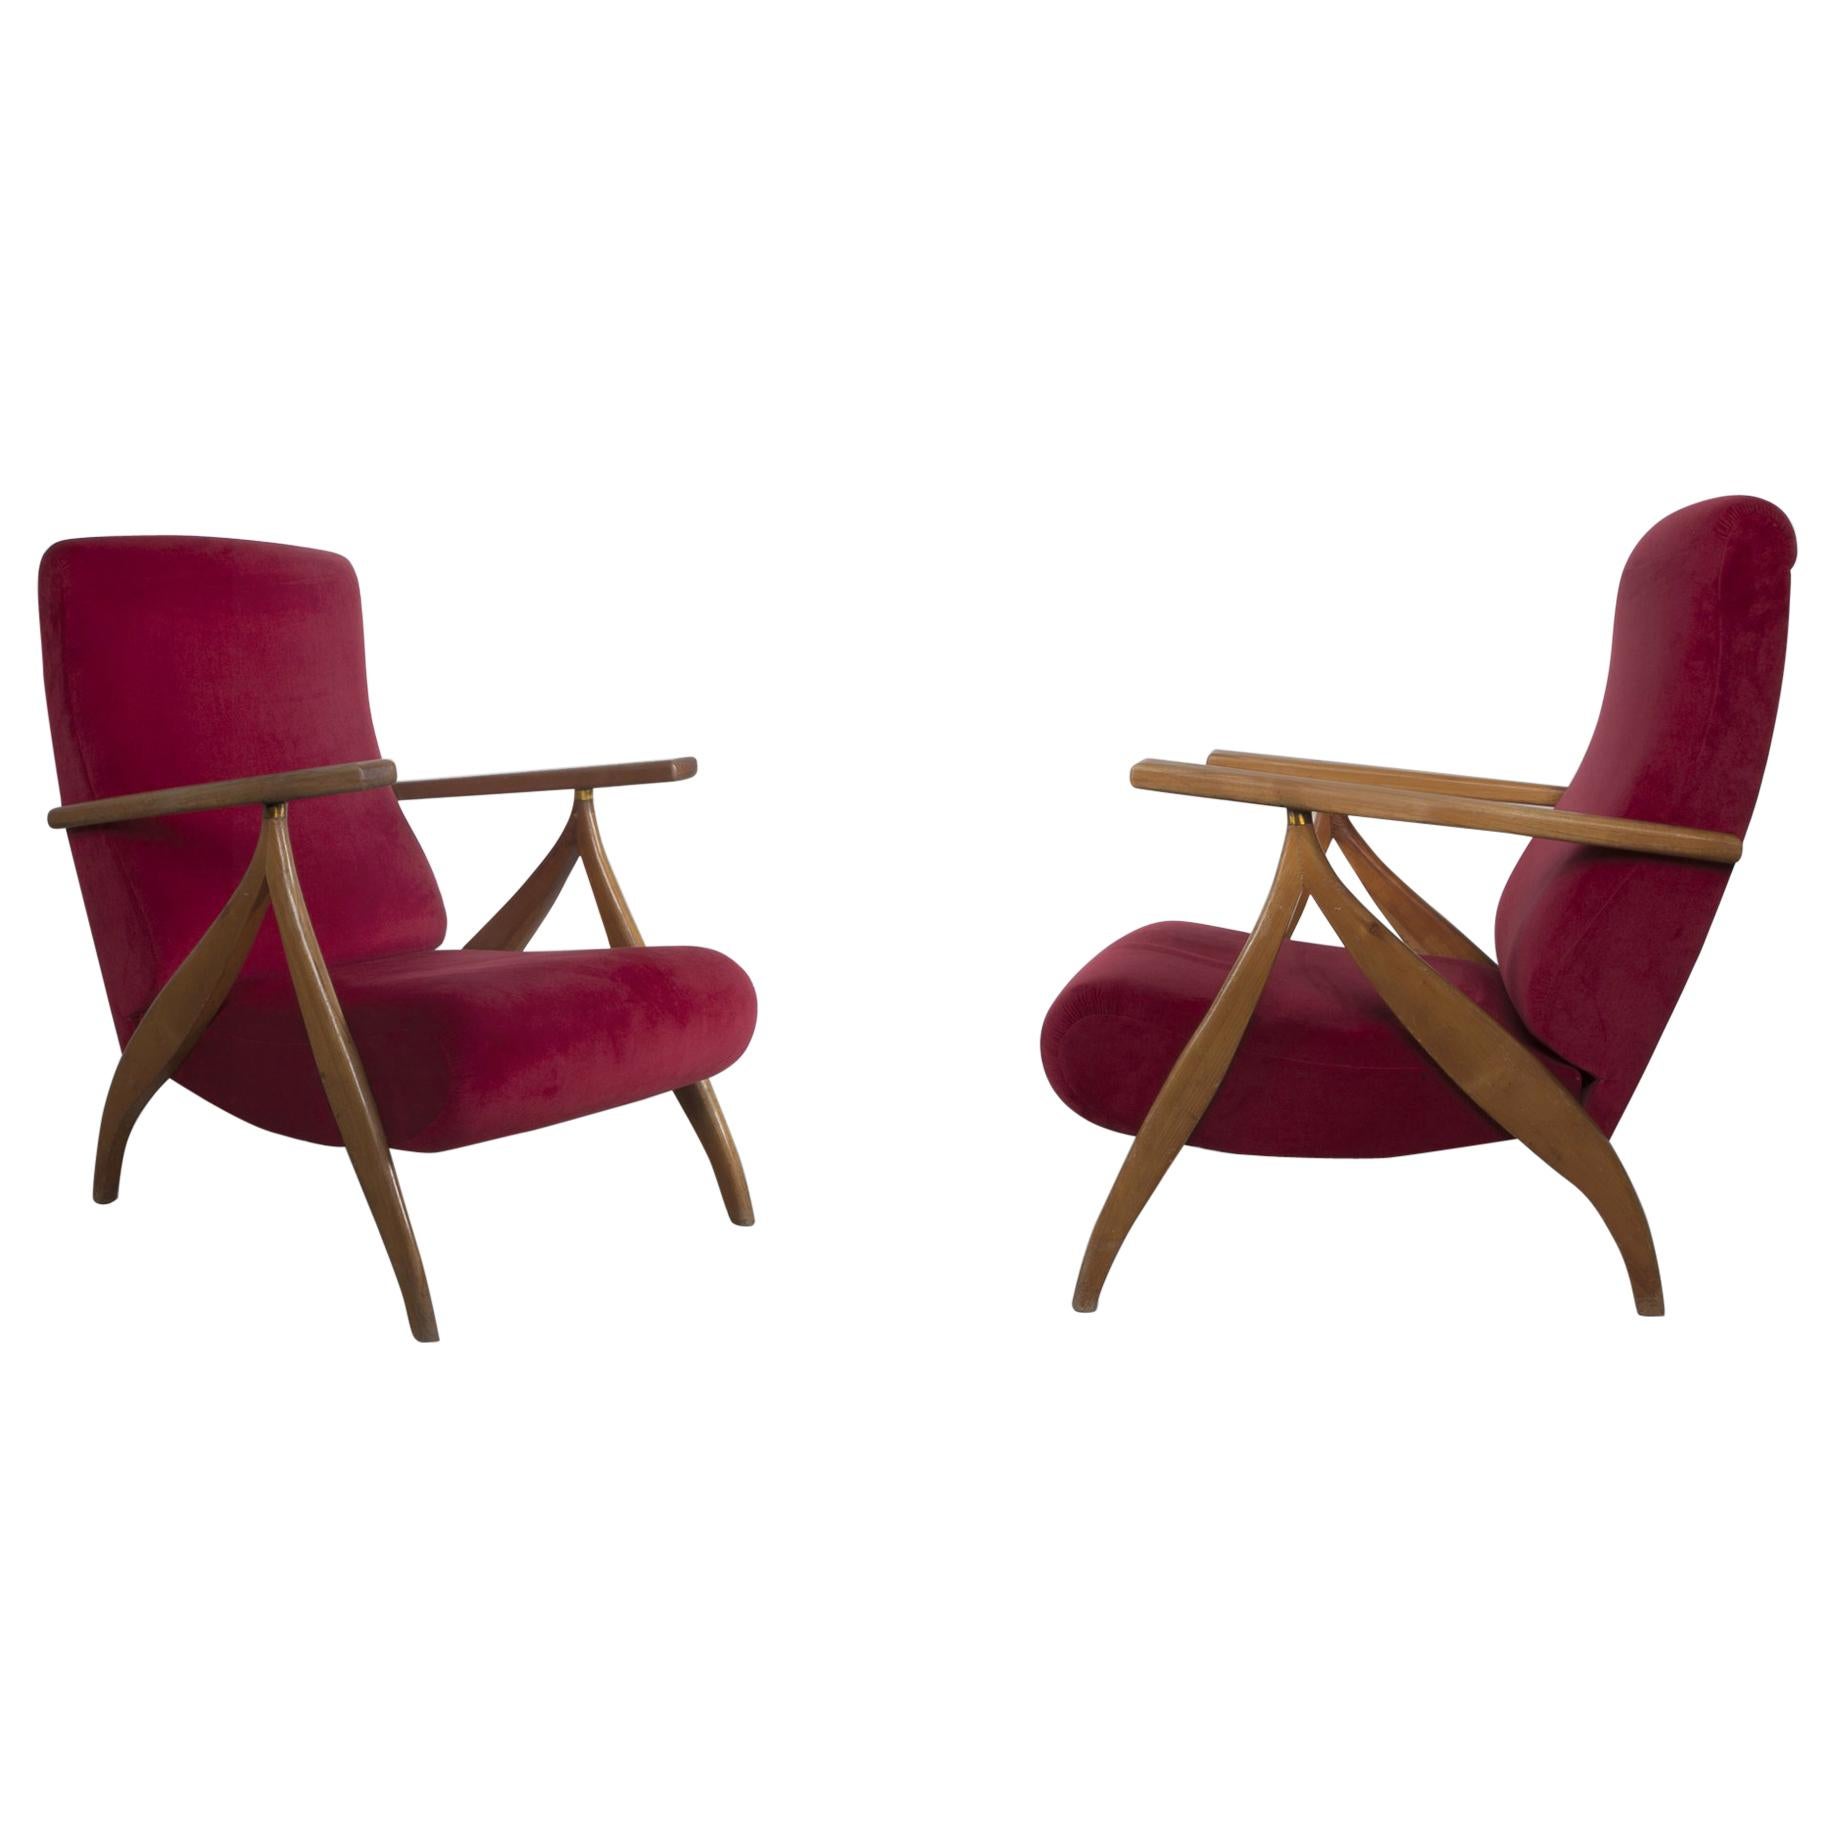 Italian Production, Pair of High Back Armchairs, 1950s im Angebot